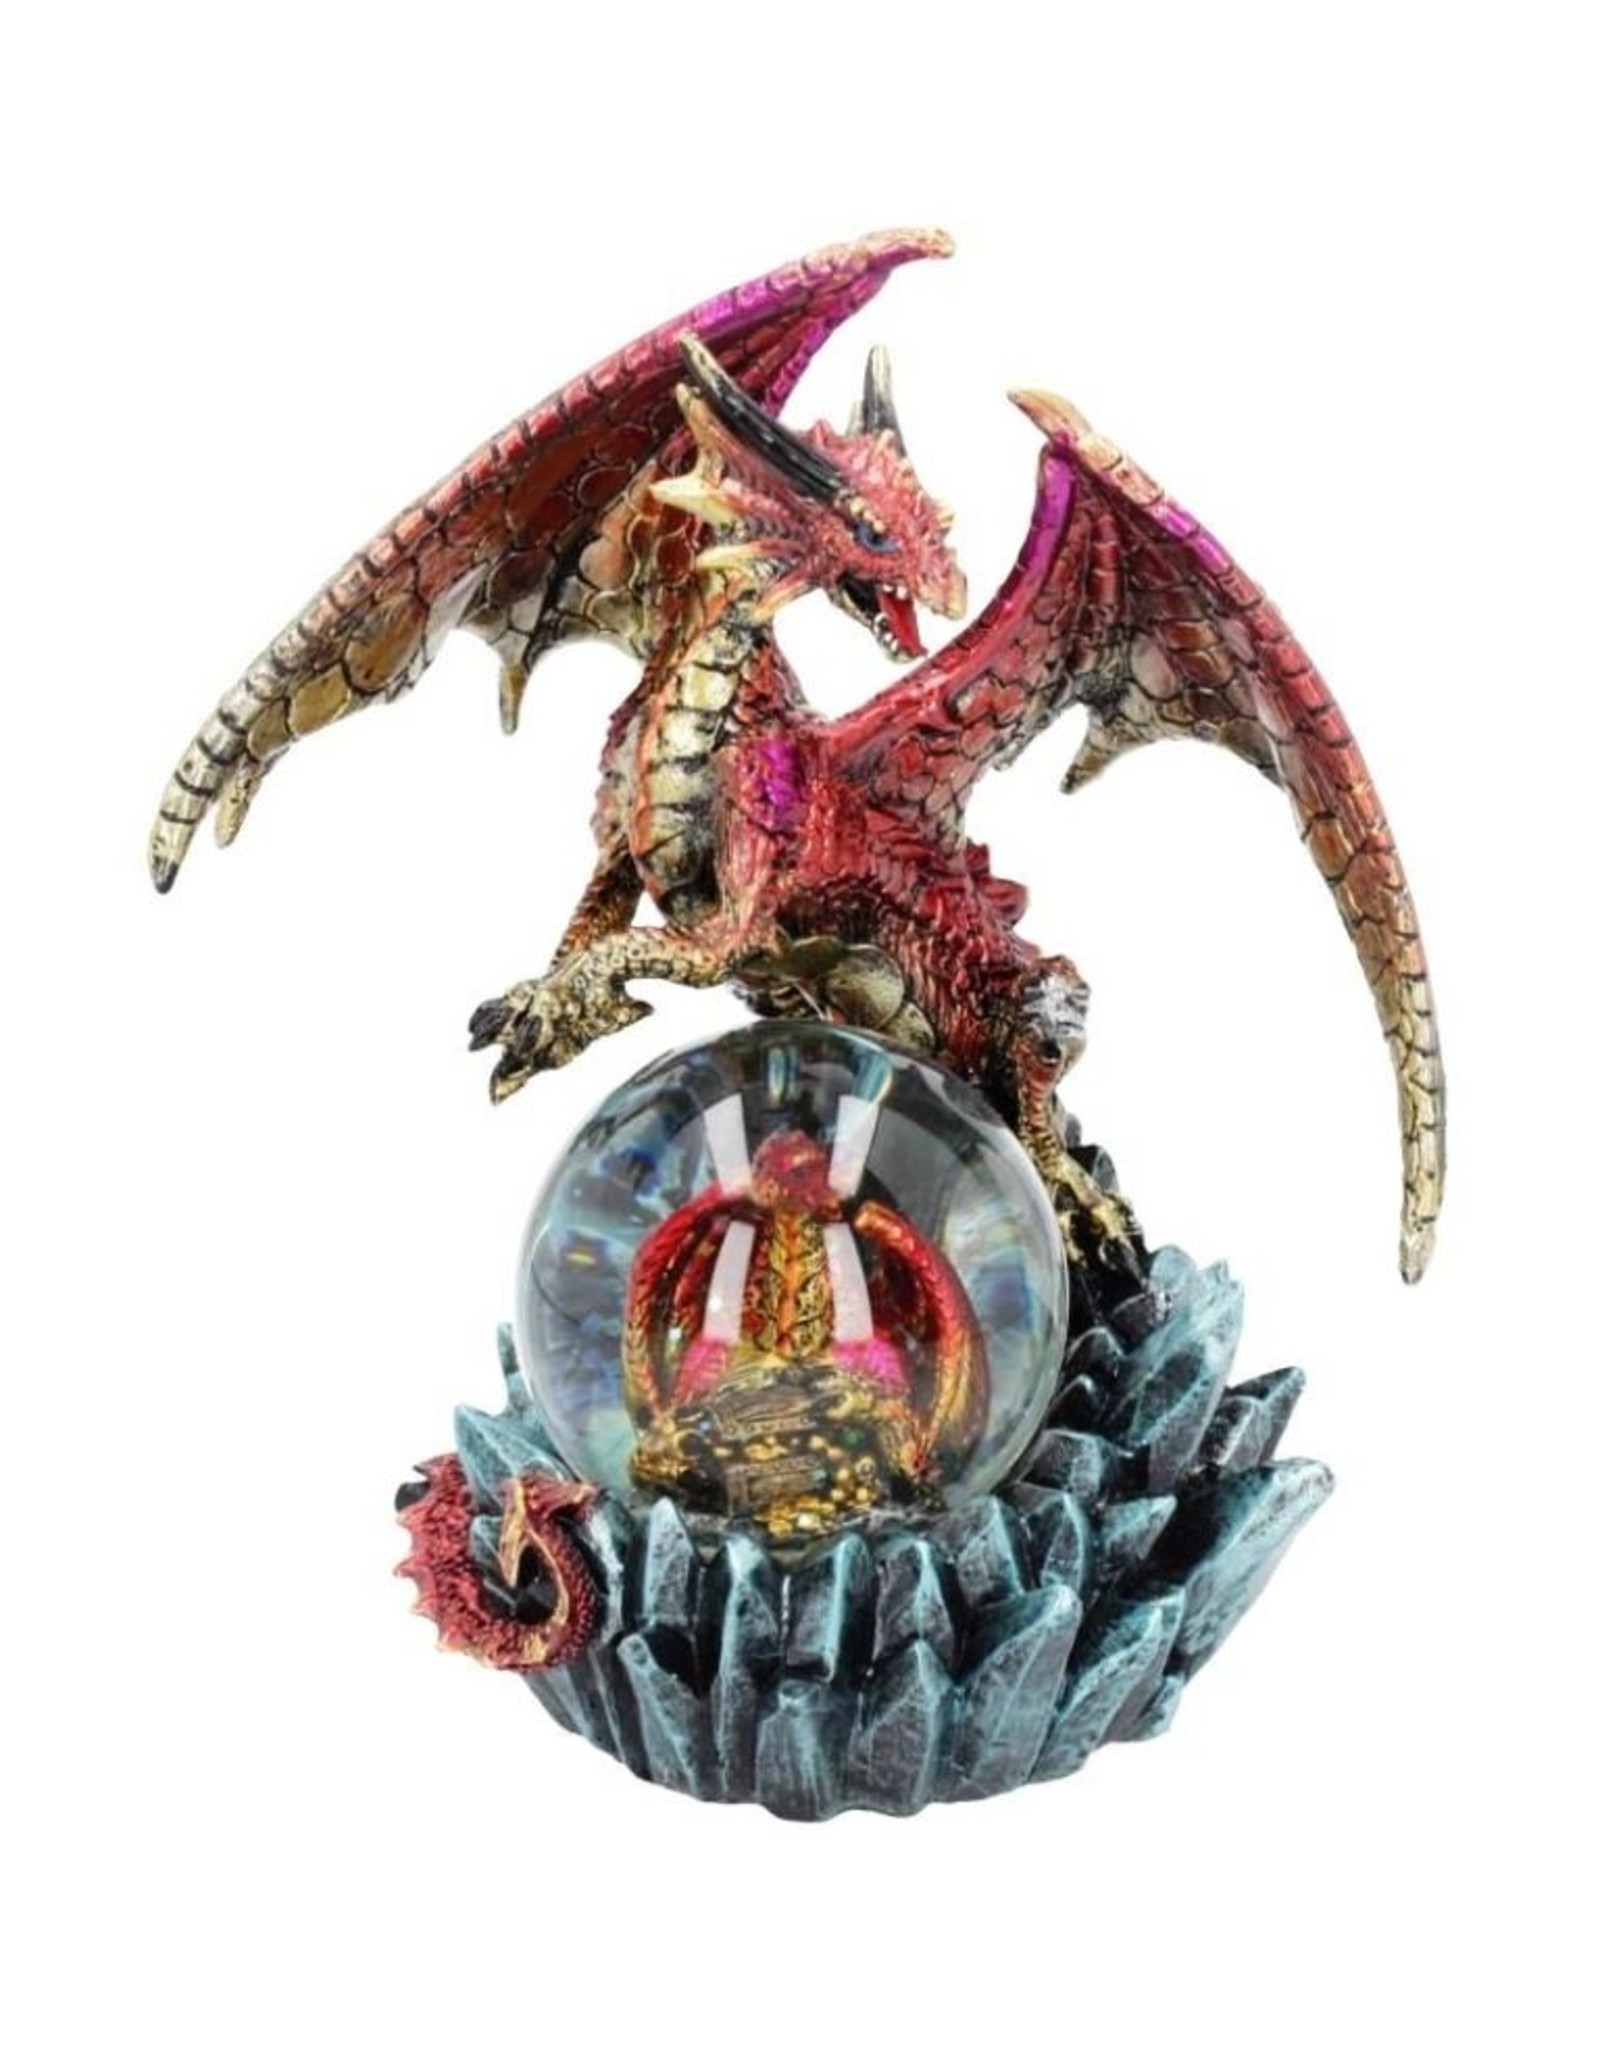 Alator Giftware & Lifestyle - Ruby Oracle Red Dragon Fortune Seer Figurine